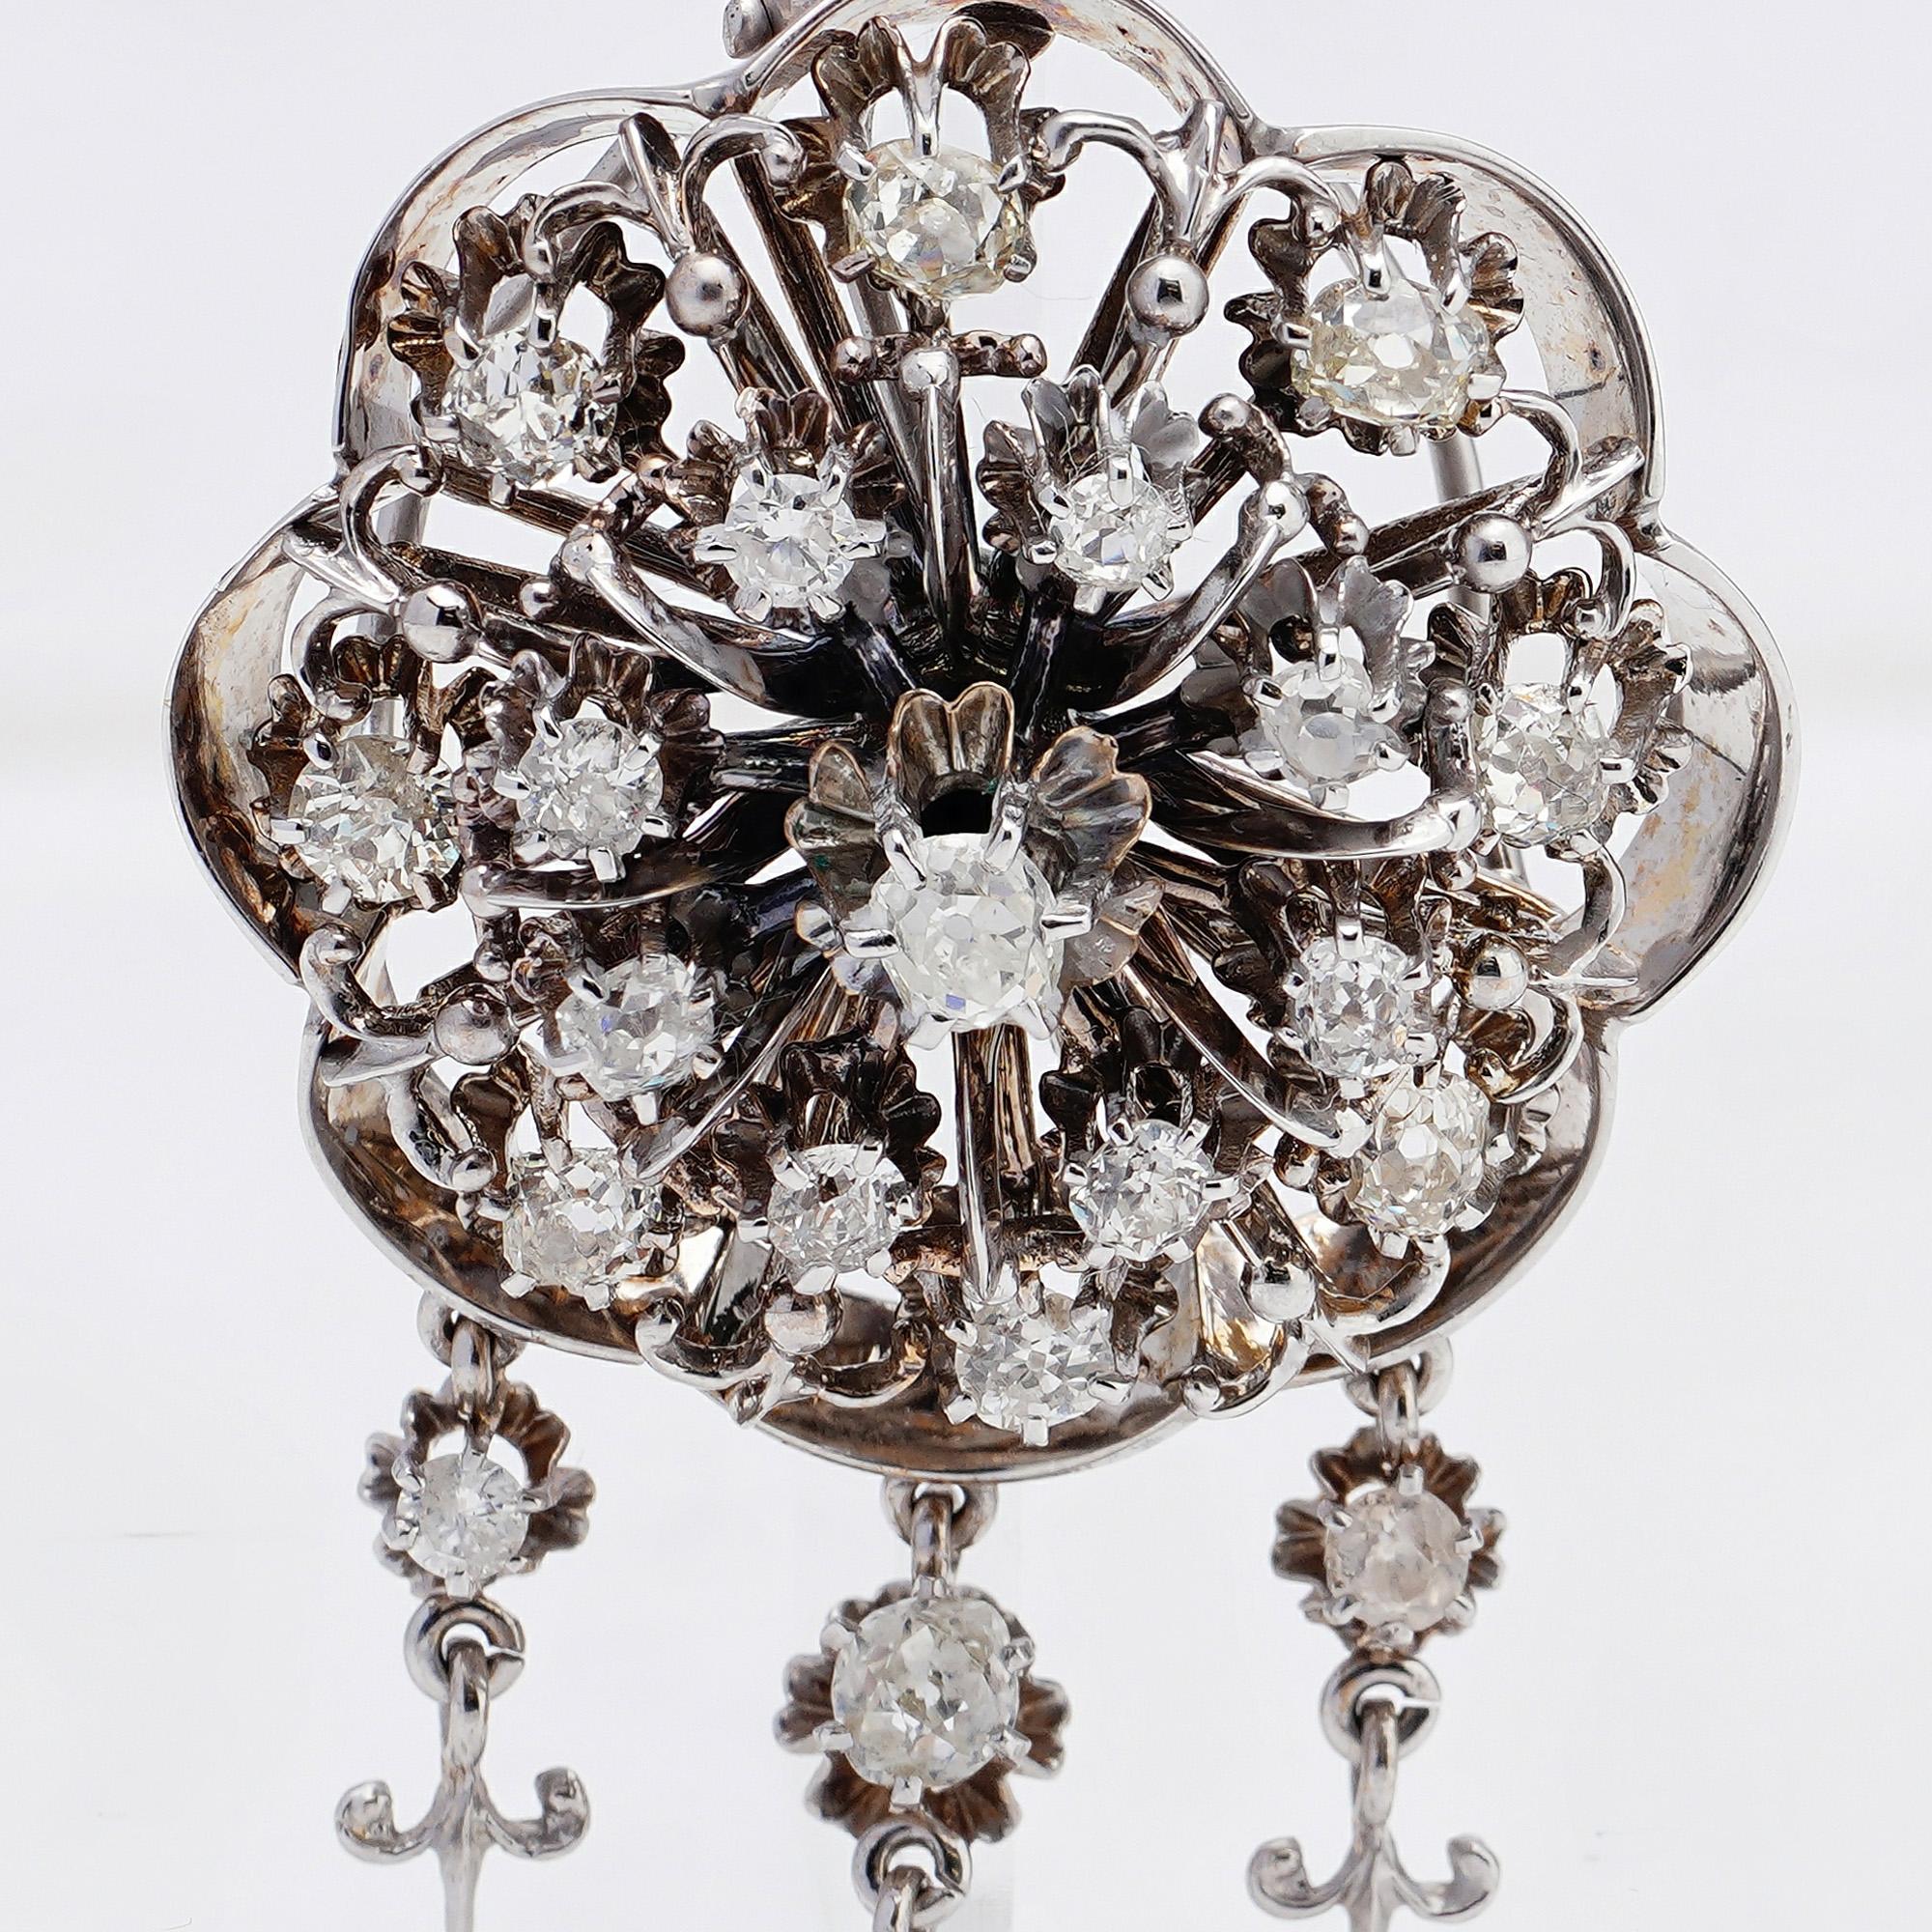 Vintage 14kt. white gold flower brooch/pendant set with 3.10 ct. rose and old cut diamonds. 
Made in circa 1930's 
Hallmarked for 14kt. white gold. 

Dimensions - 
Diameter x height: 3.5 x 2.5 cm 
Weight : 19.53 grams

Diamonds - 
Cut: Old and rose